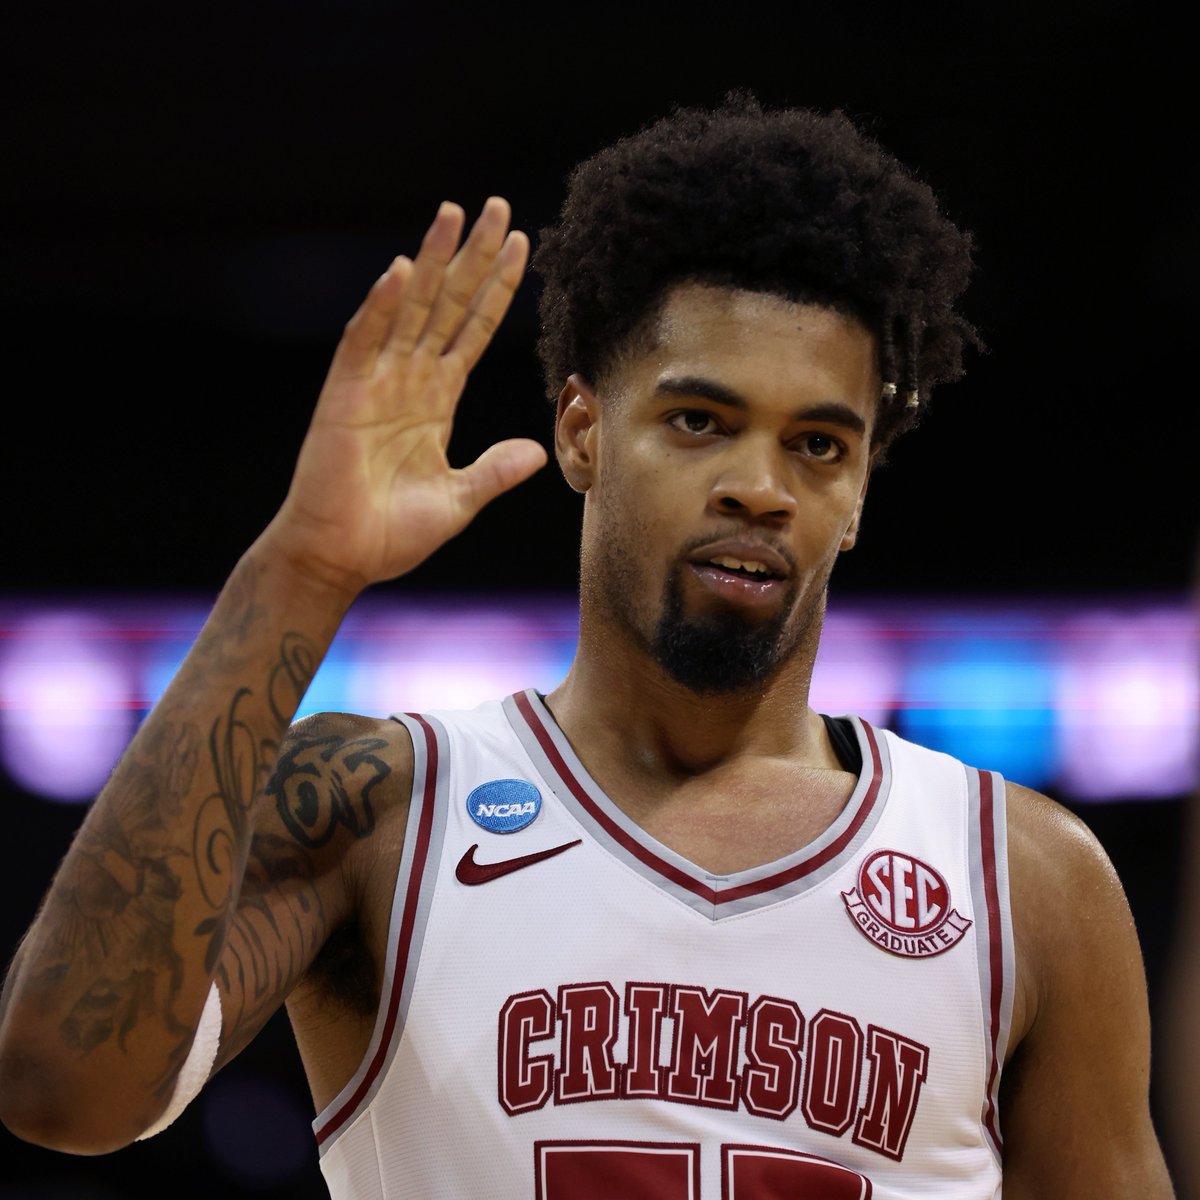 NEWS: Alabama's Aaron Estrada has been invited to the G League Elite Camp, a source told ESPN. Estrada was a two-time CAA player of the year at Hofstra and helped guide Alabama to the NCAA Final Four.